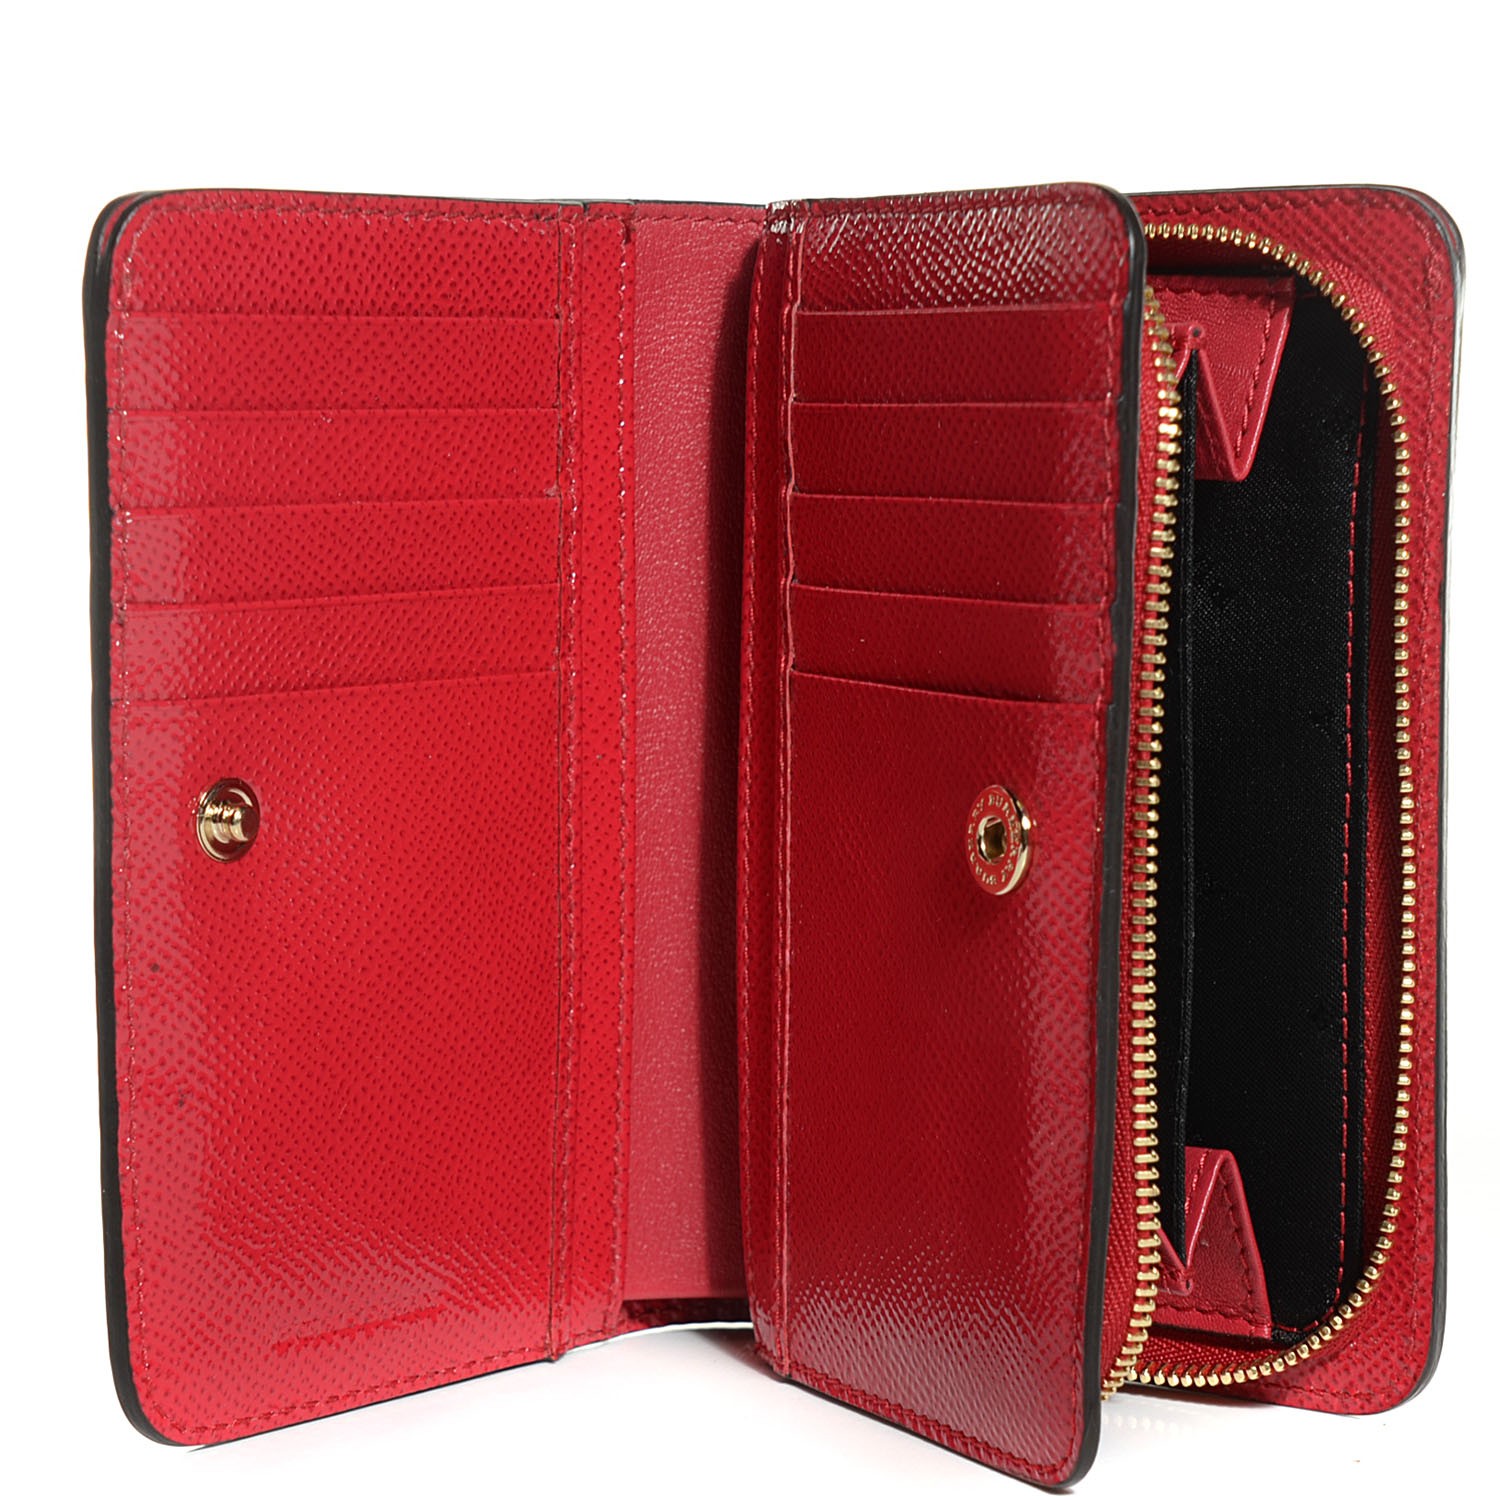 BURBERRY Patent London Compact Wallet Red 101448 | FASHIONPHILE